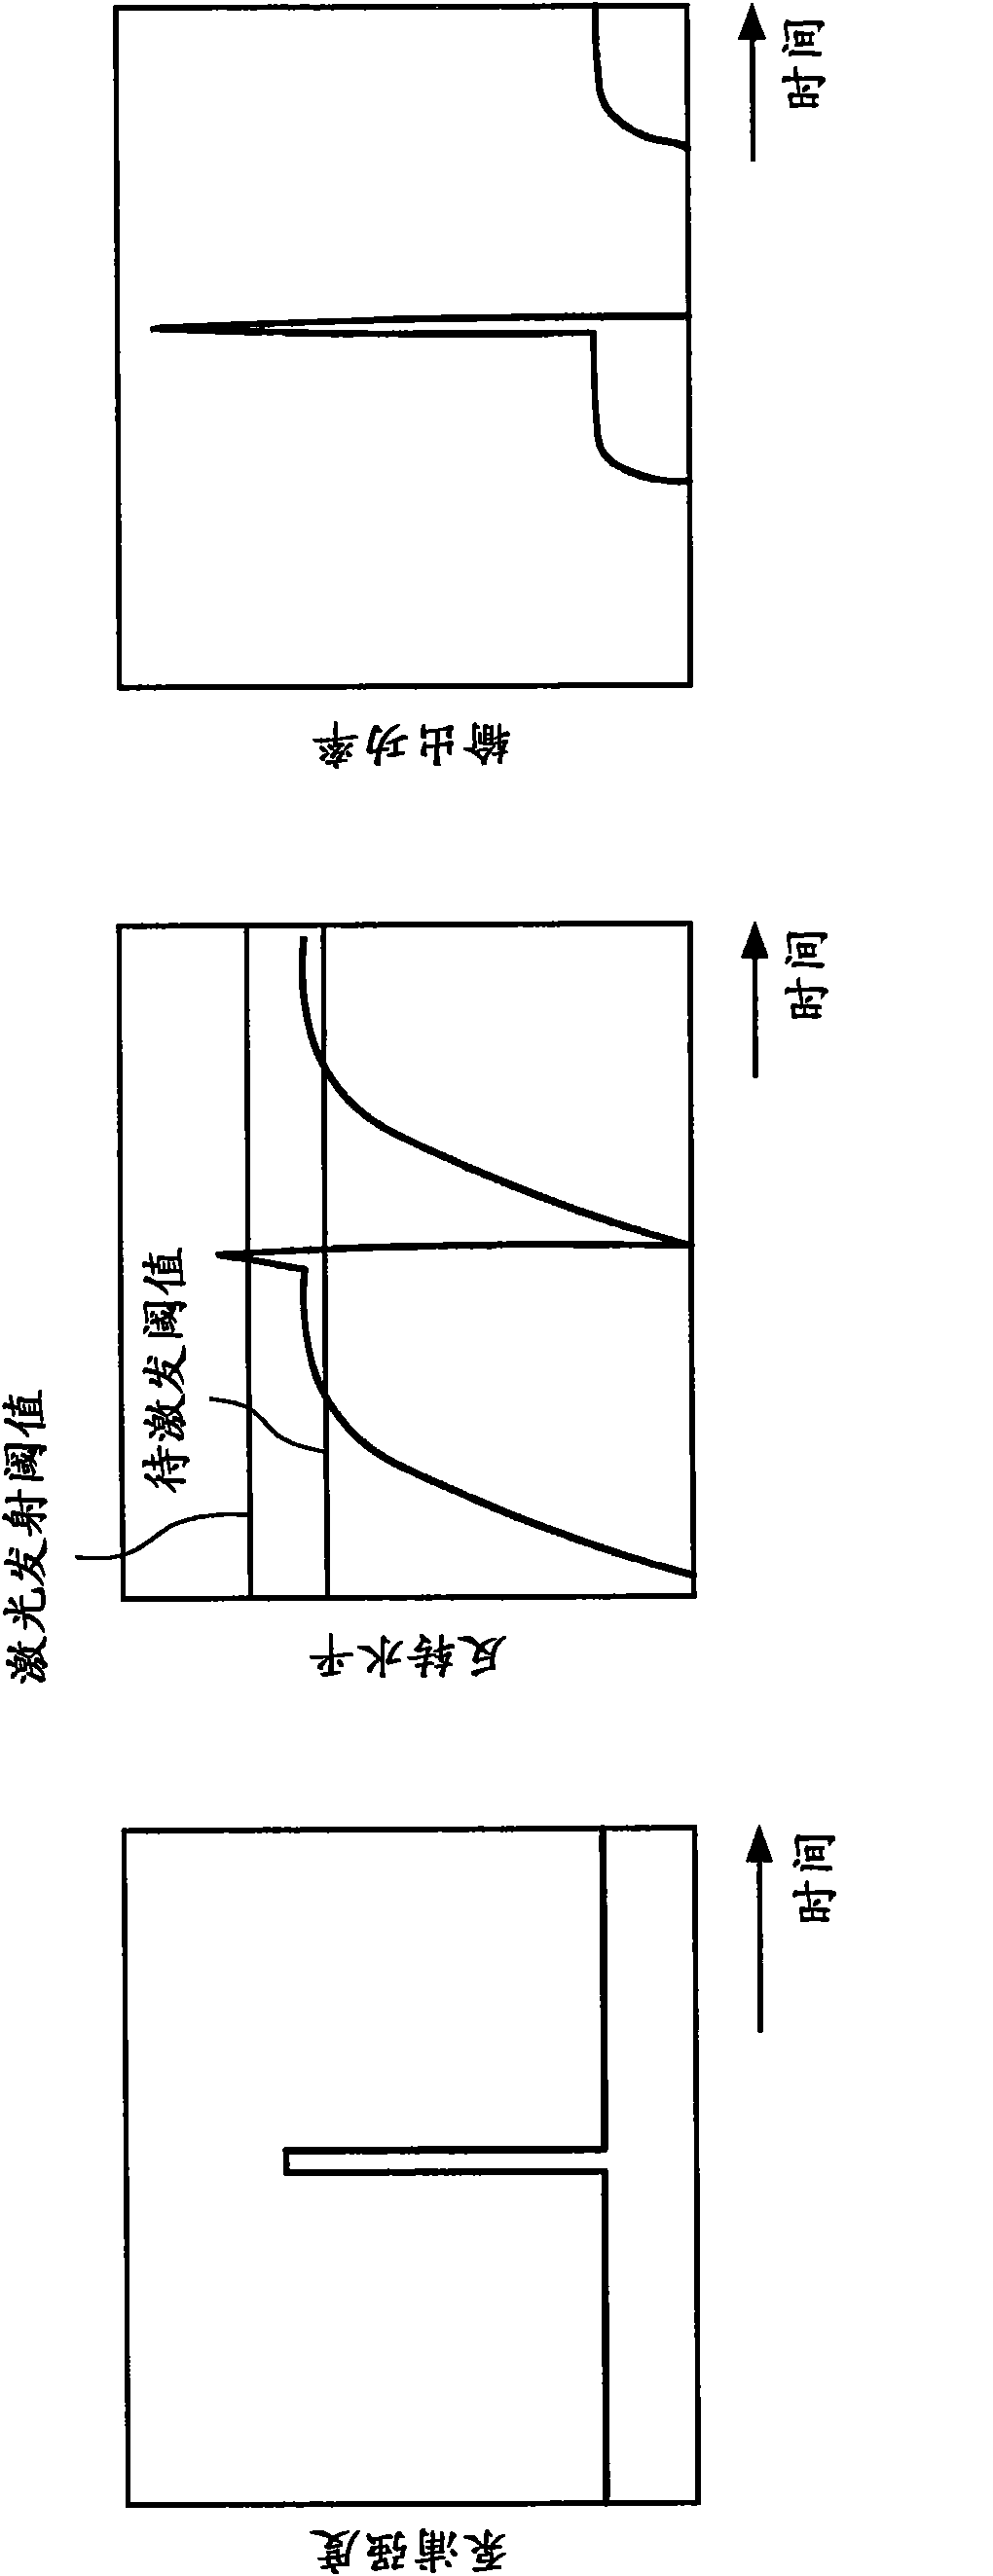 Method and device for generating a laser beam, a laser treatment device and a laser detection device